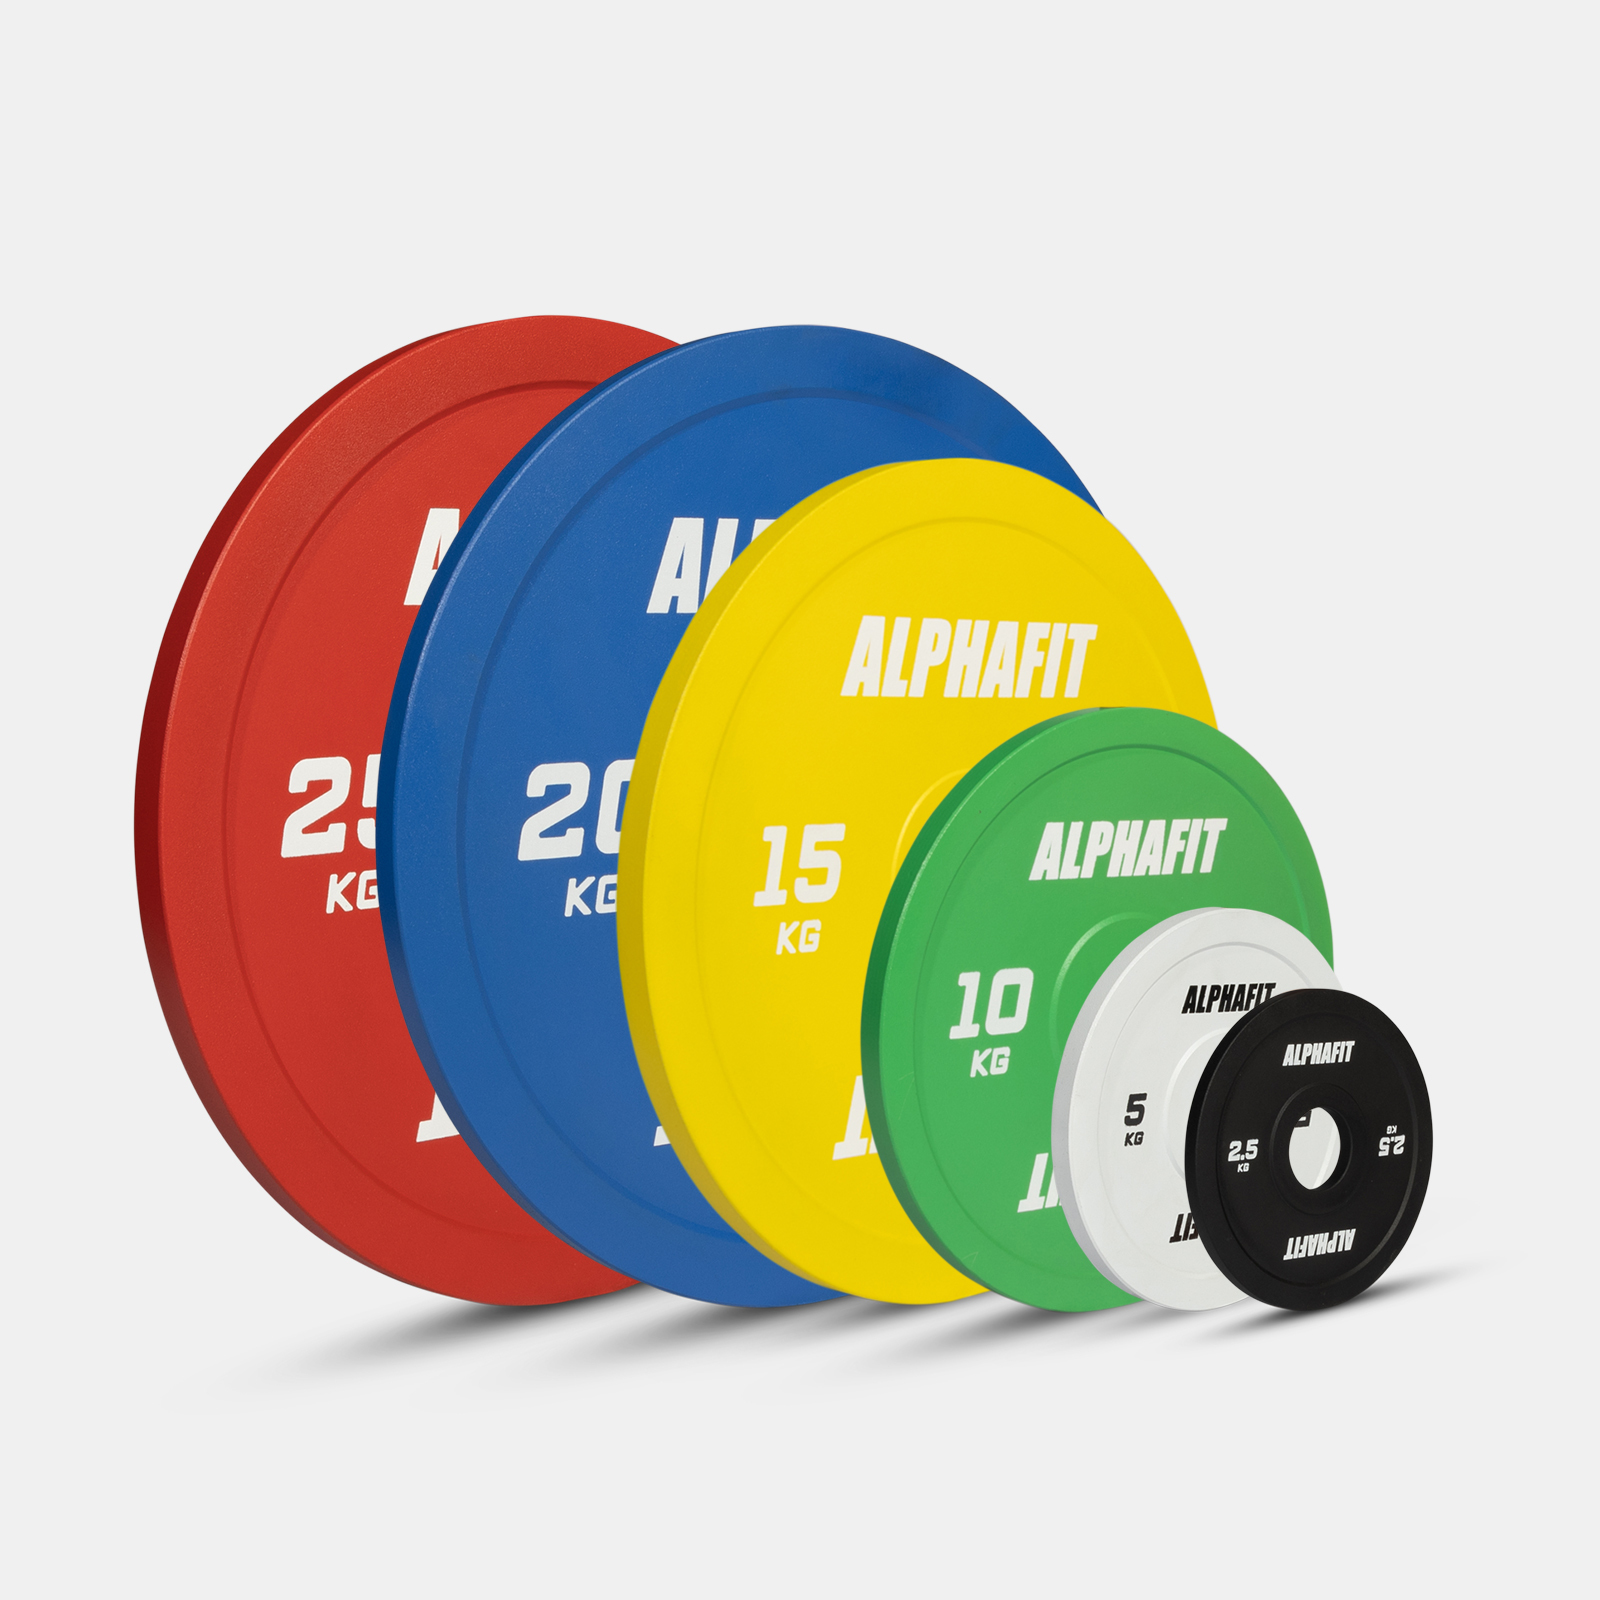 155kg Calibrated Steel Weight Plate Pack image